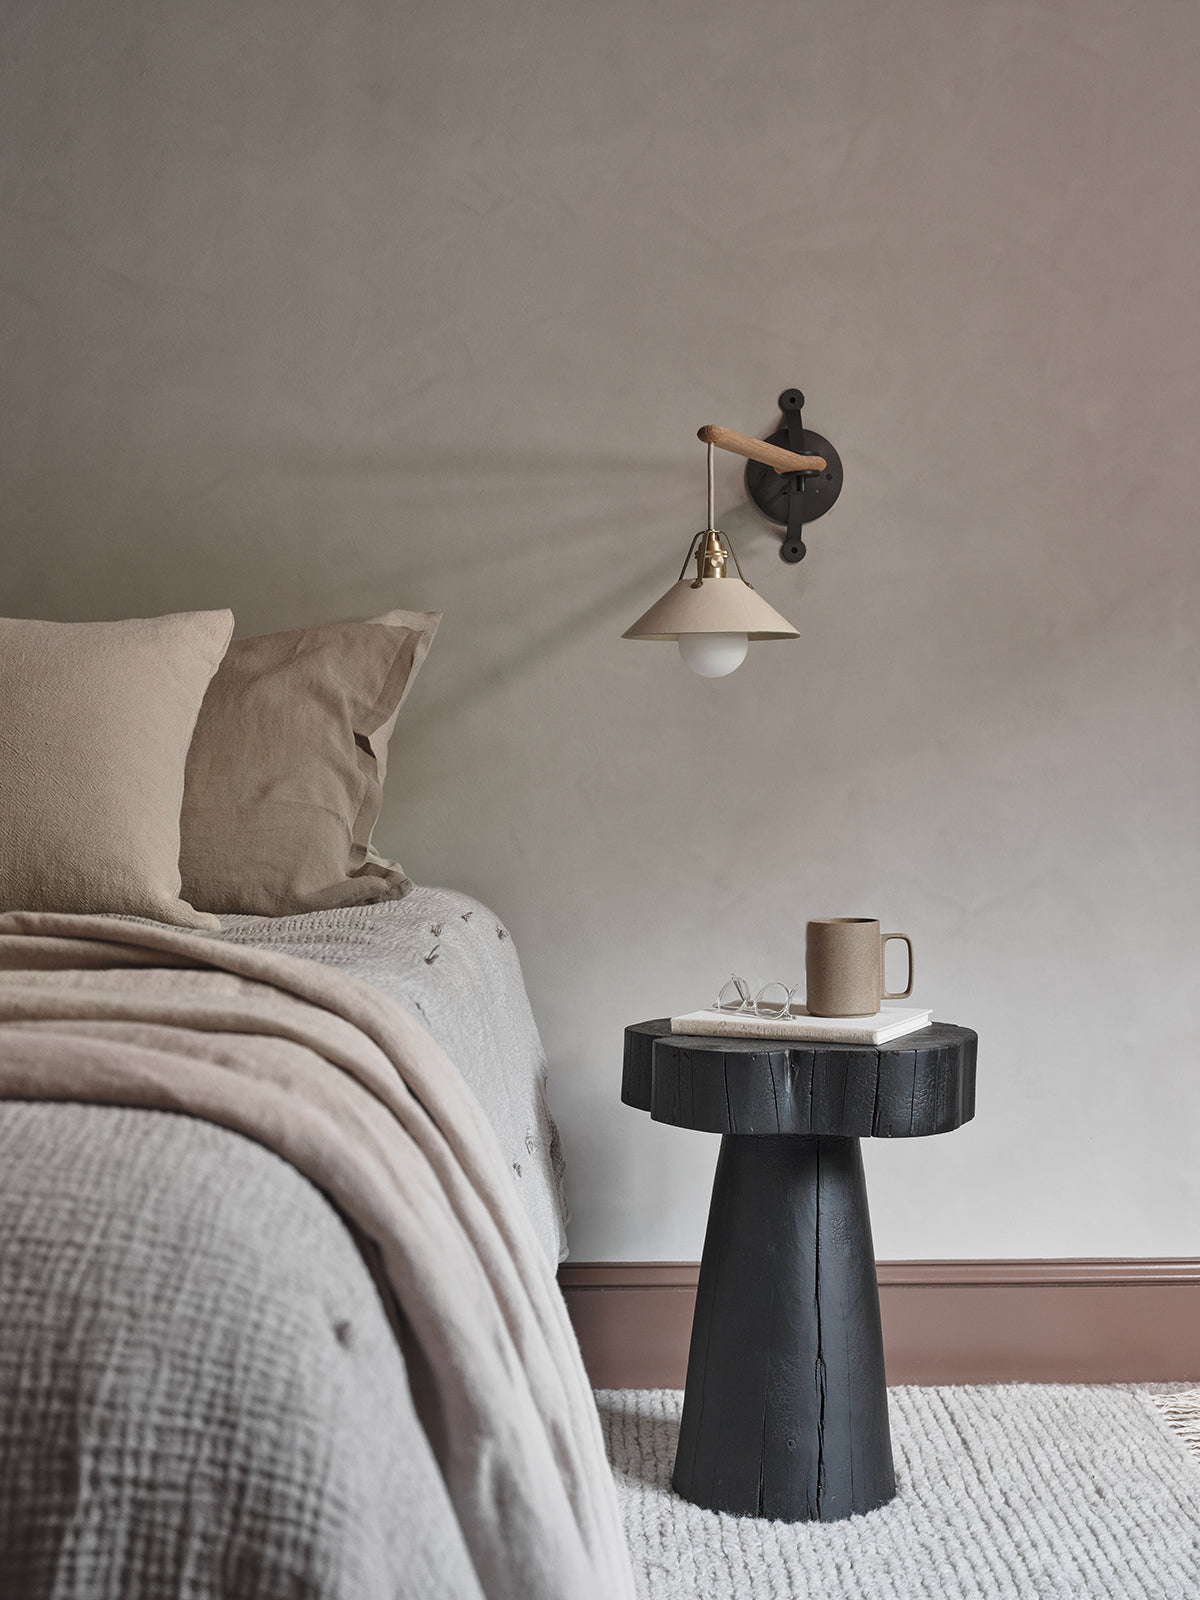 Robert True Ogden RTO Lighting - Small Yaffa Swing Arm Sconce - Hardwired - Eggshell Leather Shade - Natural Oak Arm - Oil Rubbed Brass Wall Brackets#leather-shade_eggshell